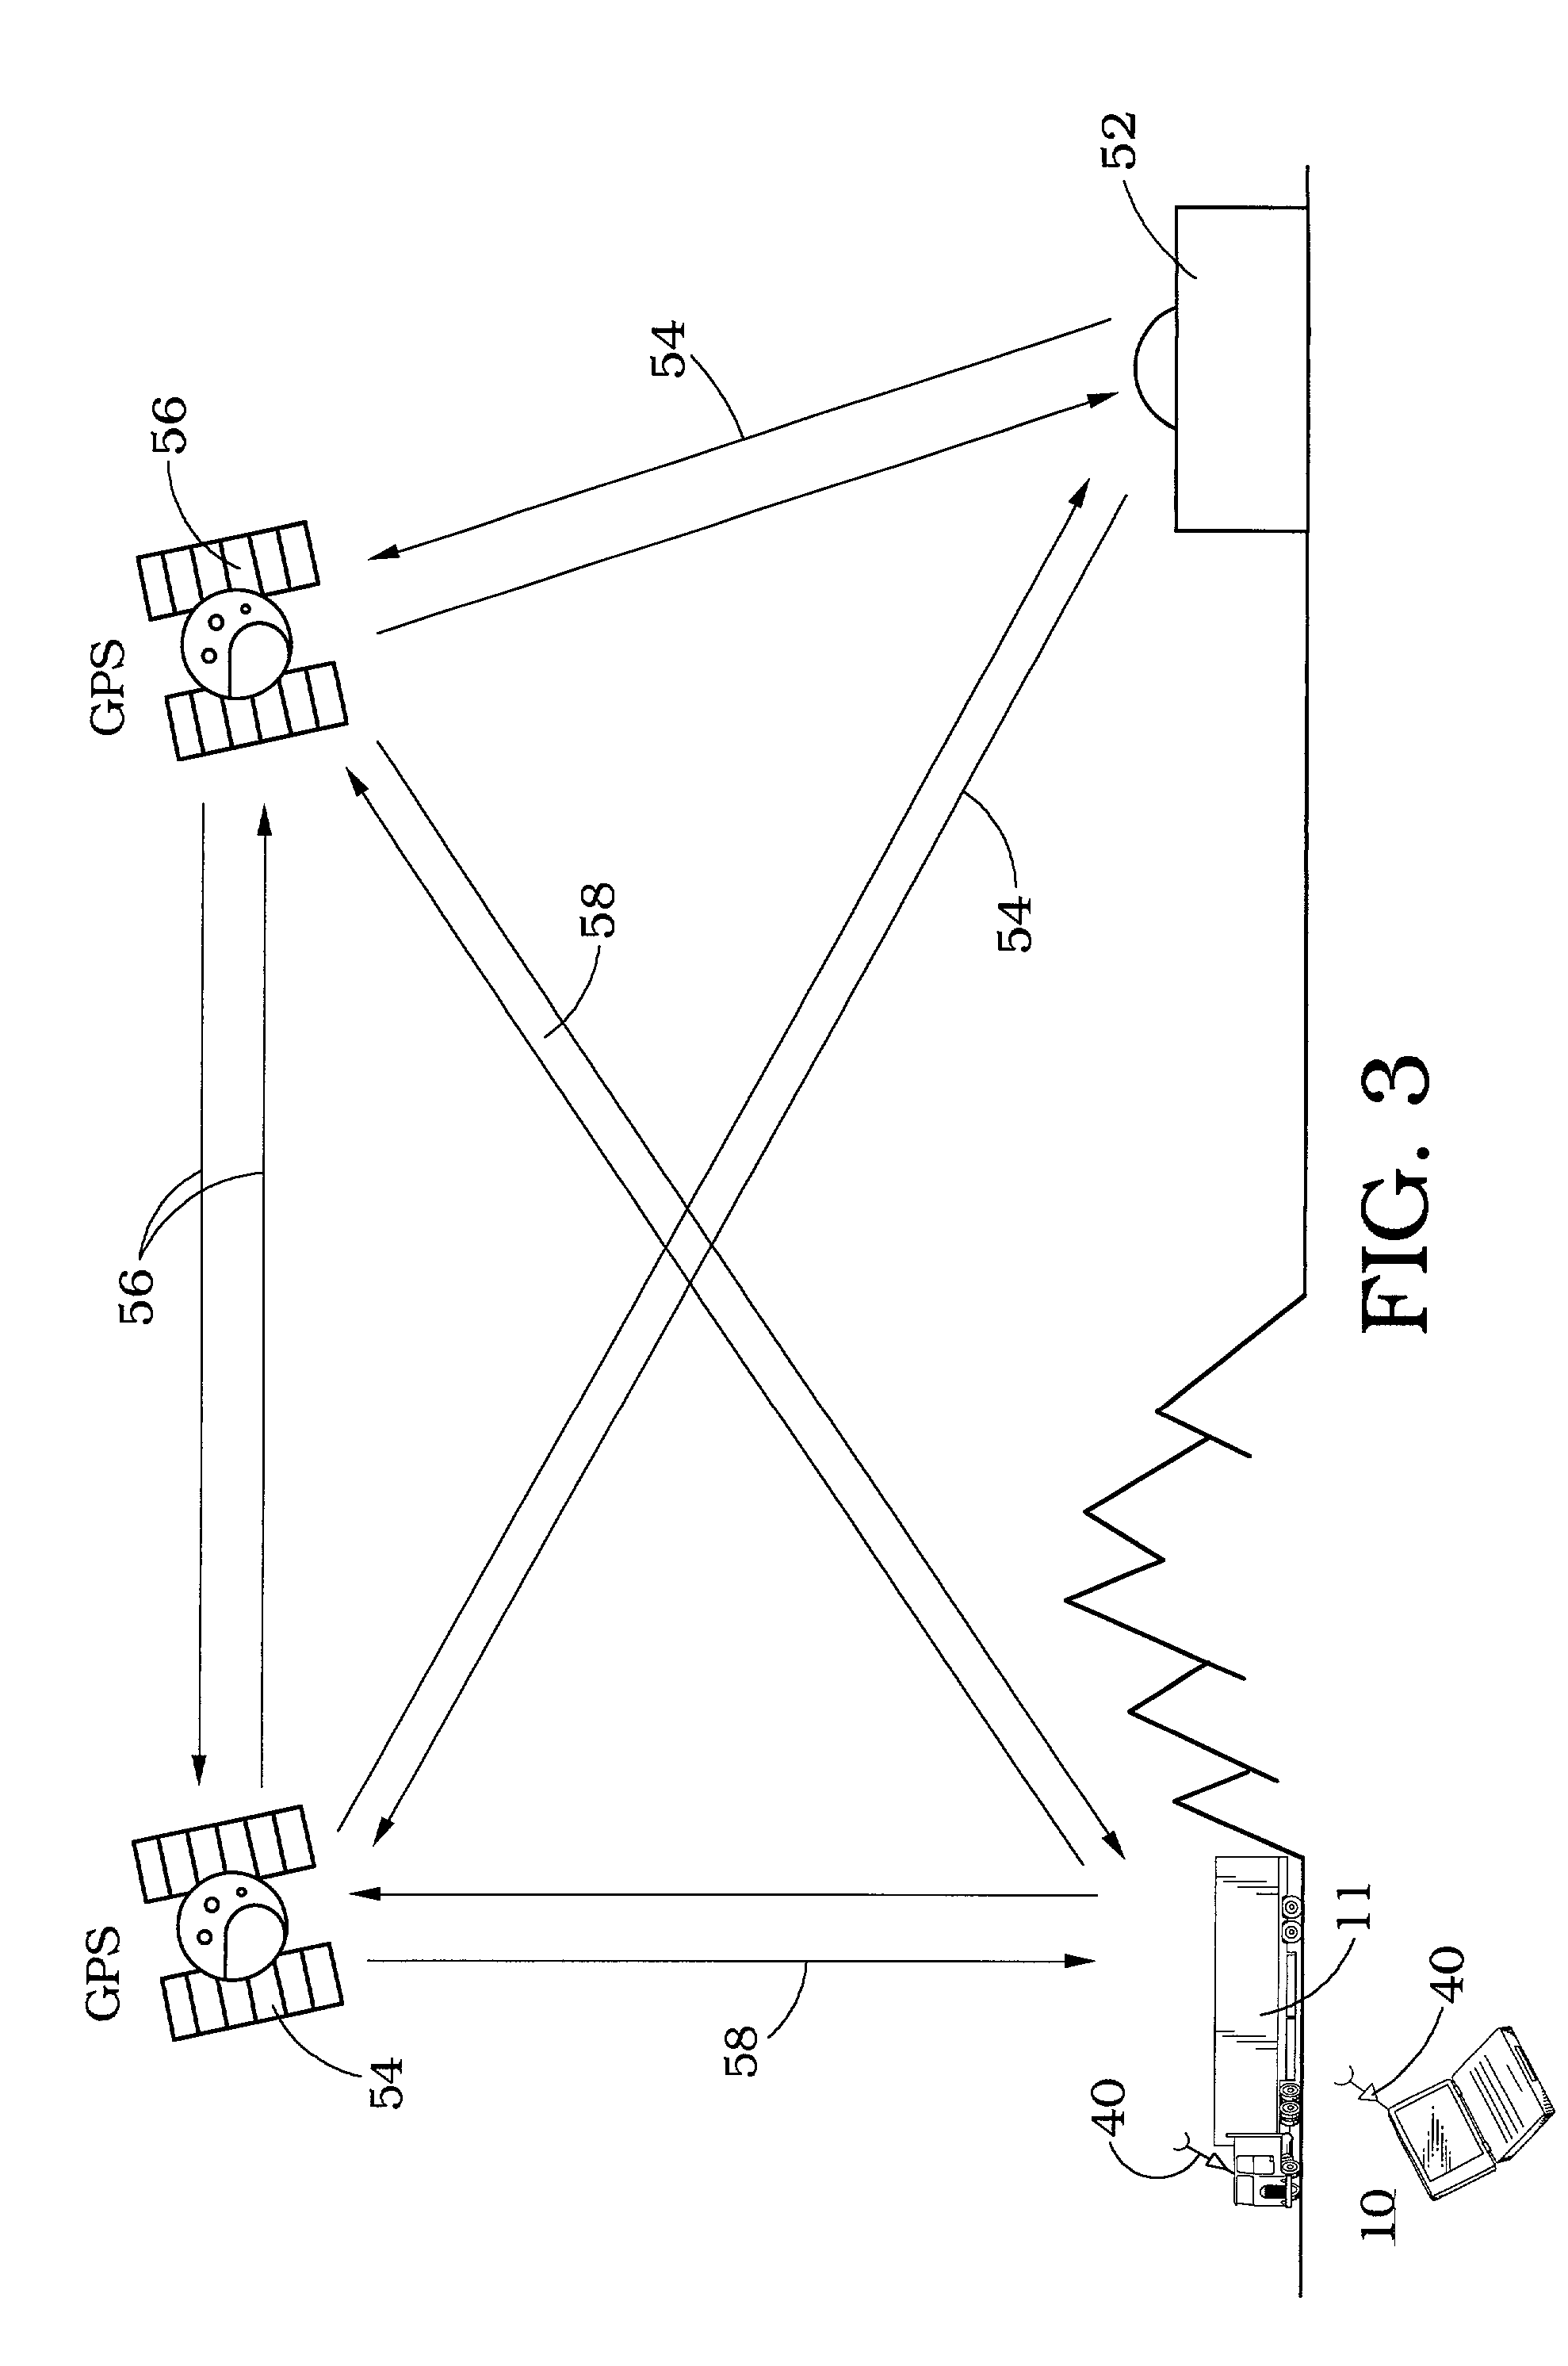 Incident recording information transfer device